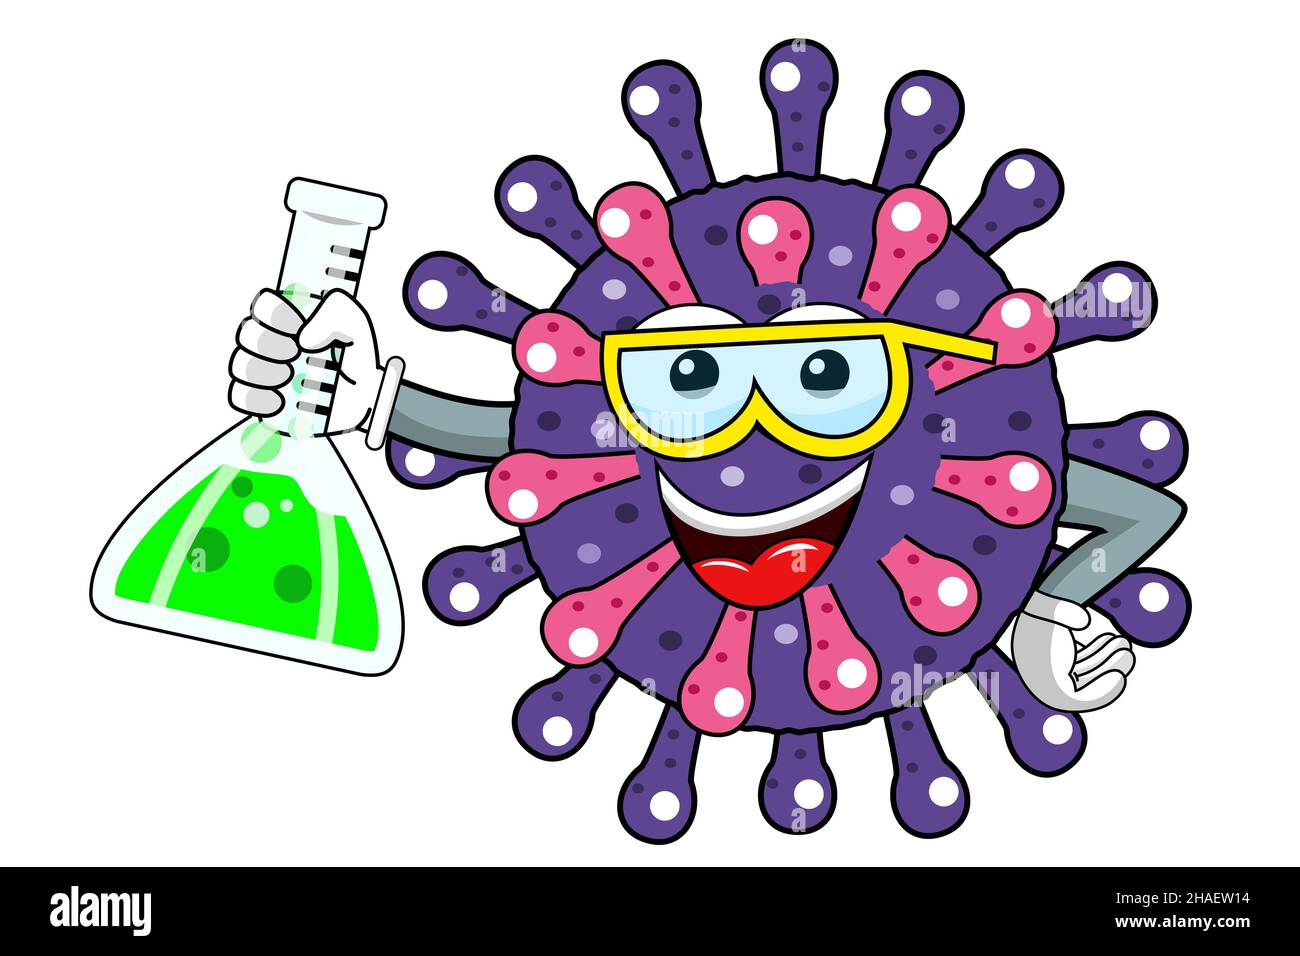 Carton mascot character virus or bacterium performing chemestry experiment science isolated vector illustration Stock Photo